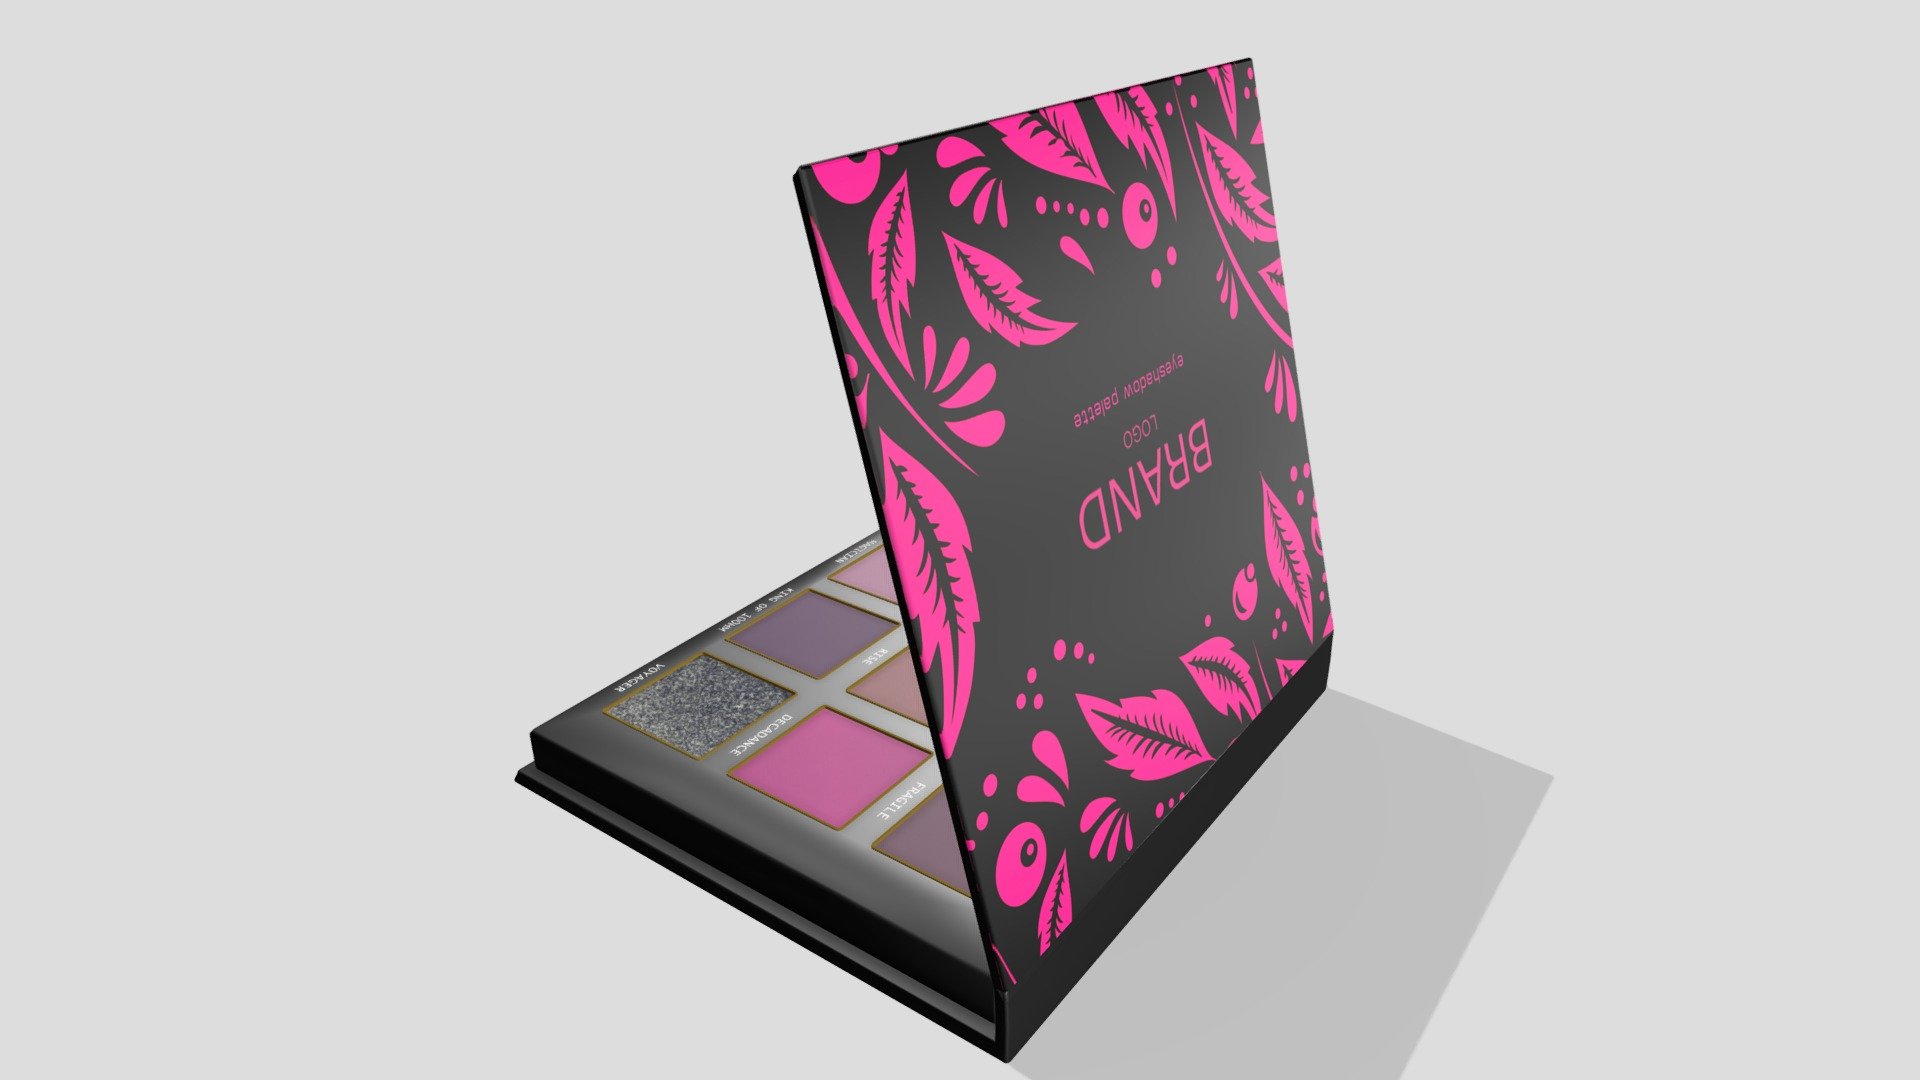 Cosmetic Eyeshadow Palette 3D models with text/brand/colors template. Includes models with/without mirror. 2 ready project with tuned materials for Standart and Corona render. All main parts are presented as separate parts therefore colors of objects are easy to be modified and standard parts are easy to be replaced or removed. All objects are named and grouped for ease of objects selection and scene management. Created slider to open/close cap. Perfect for closeups. No special plug-ins necessary to use this product.

Includes c4d, fbx, 3ds, stl and obj files + textures.

You can buy this 3D model on cgtrader, artstation, turbosquid or here.

This 3D model is included in:

Cosmetic Pack

Enjoy 3d model